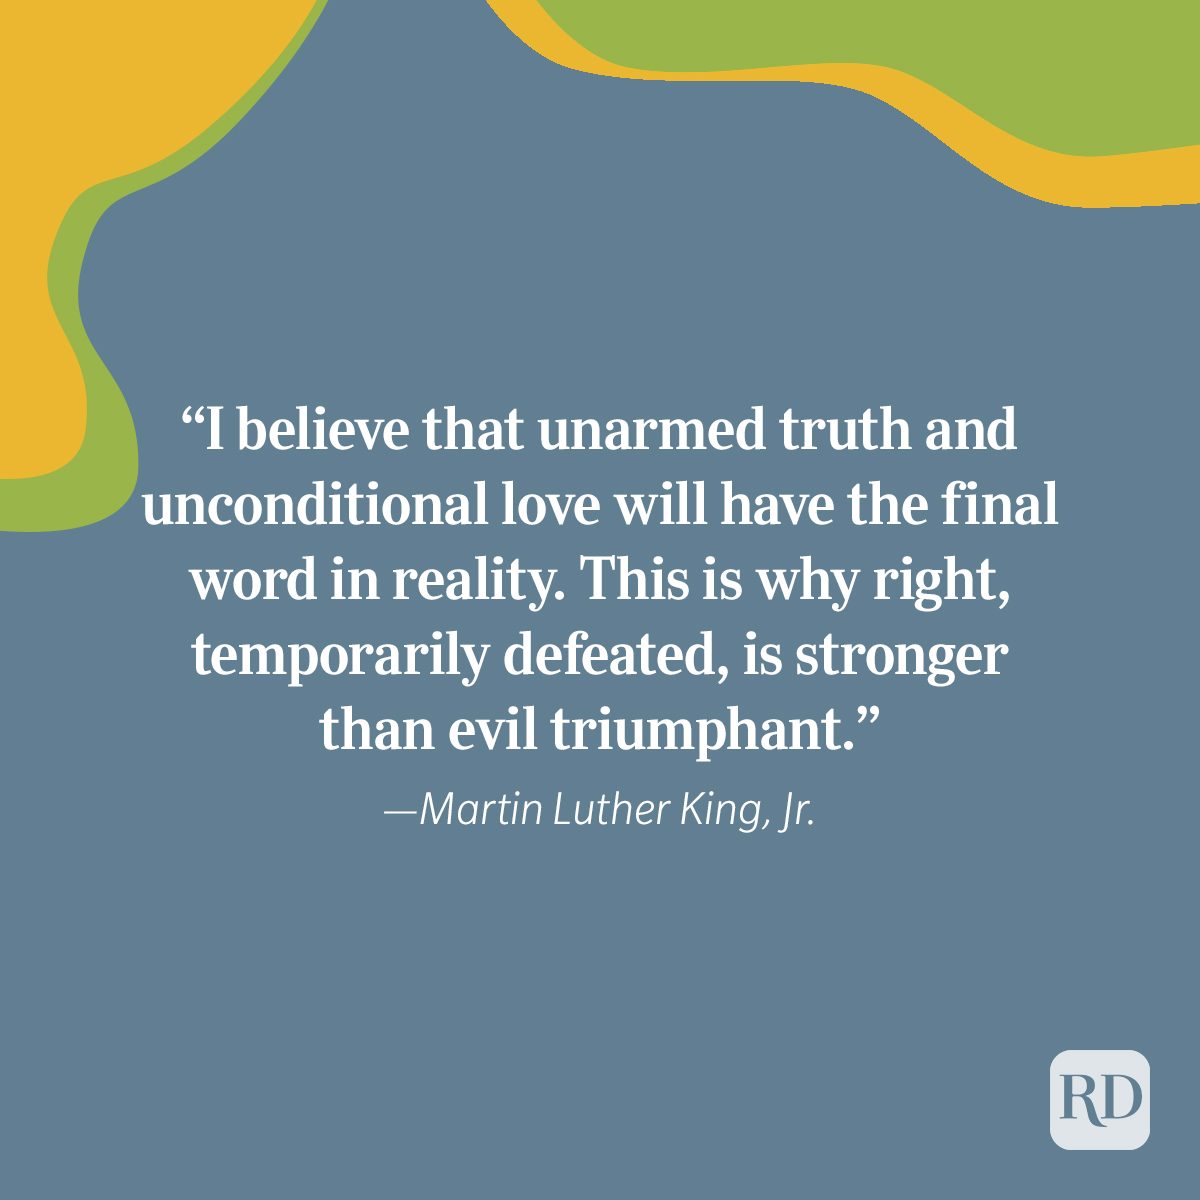 Martin Luther King, Jr. quote: I still believe that standing up for the  truth of